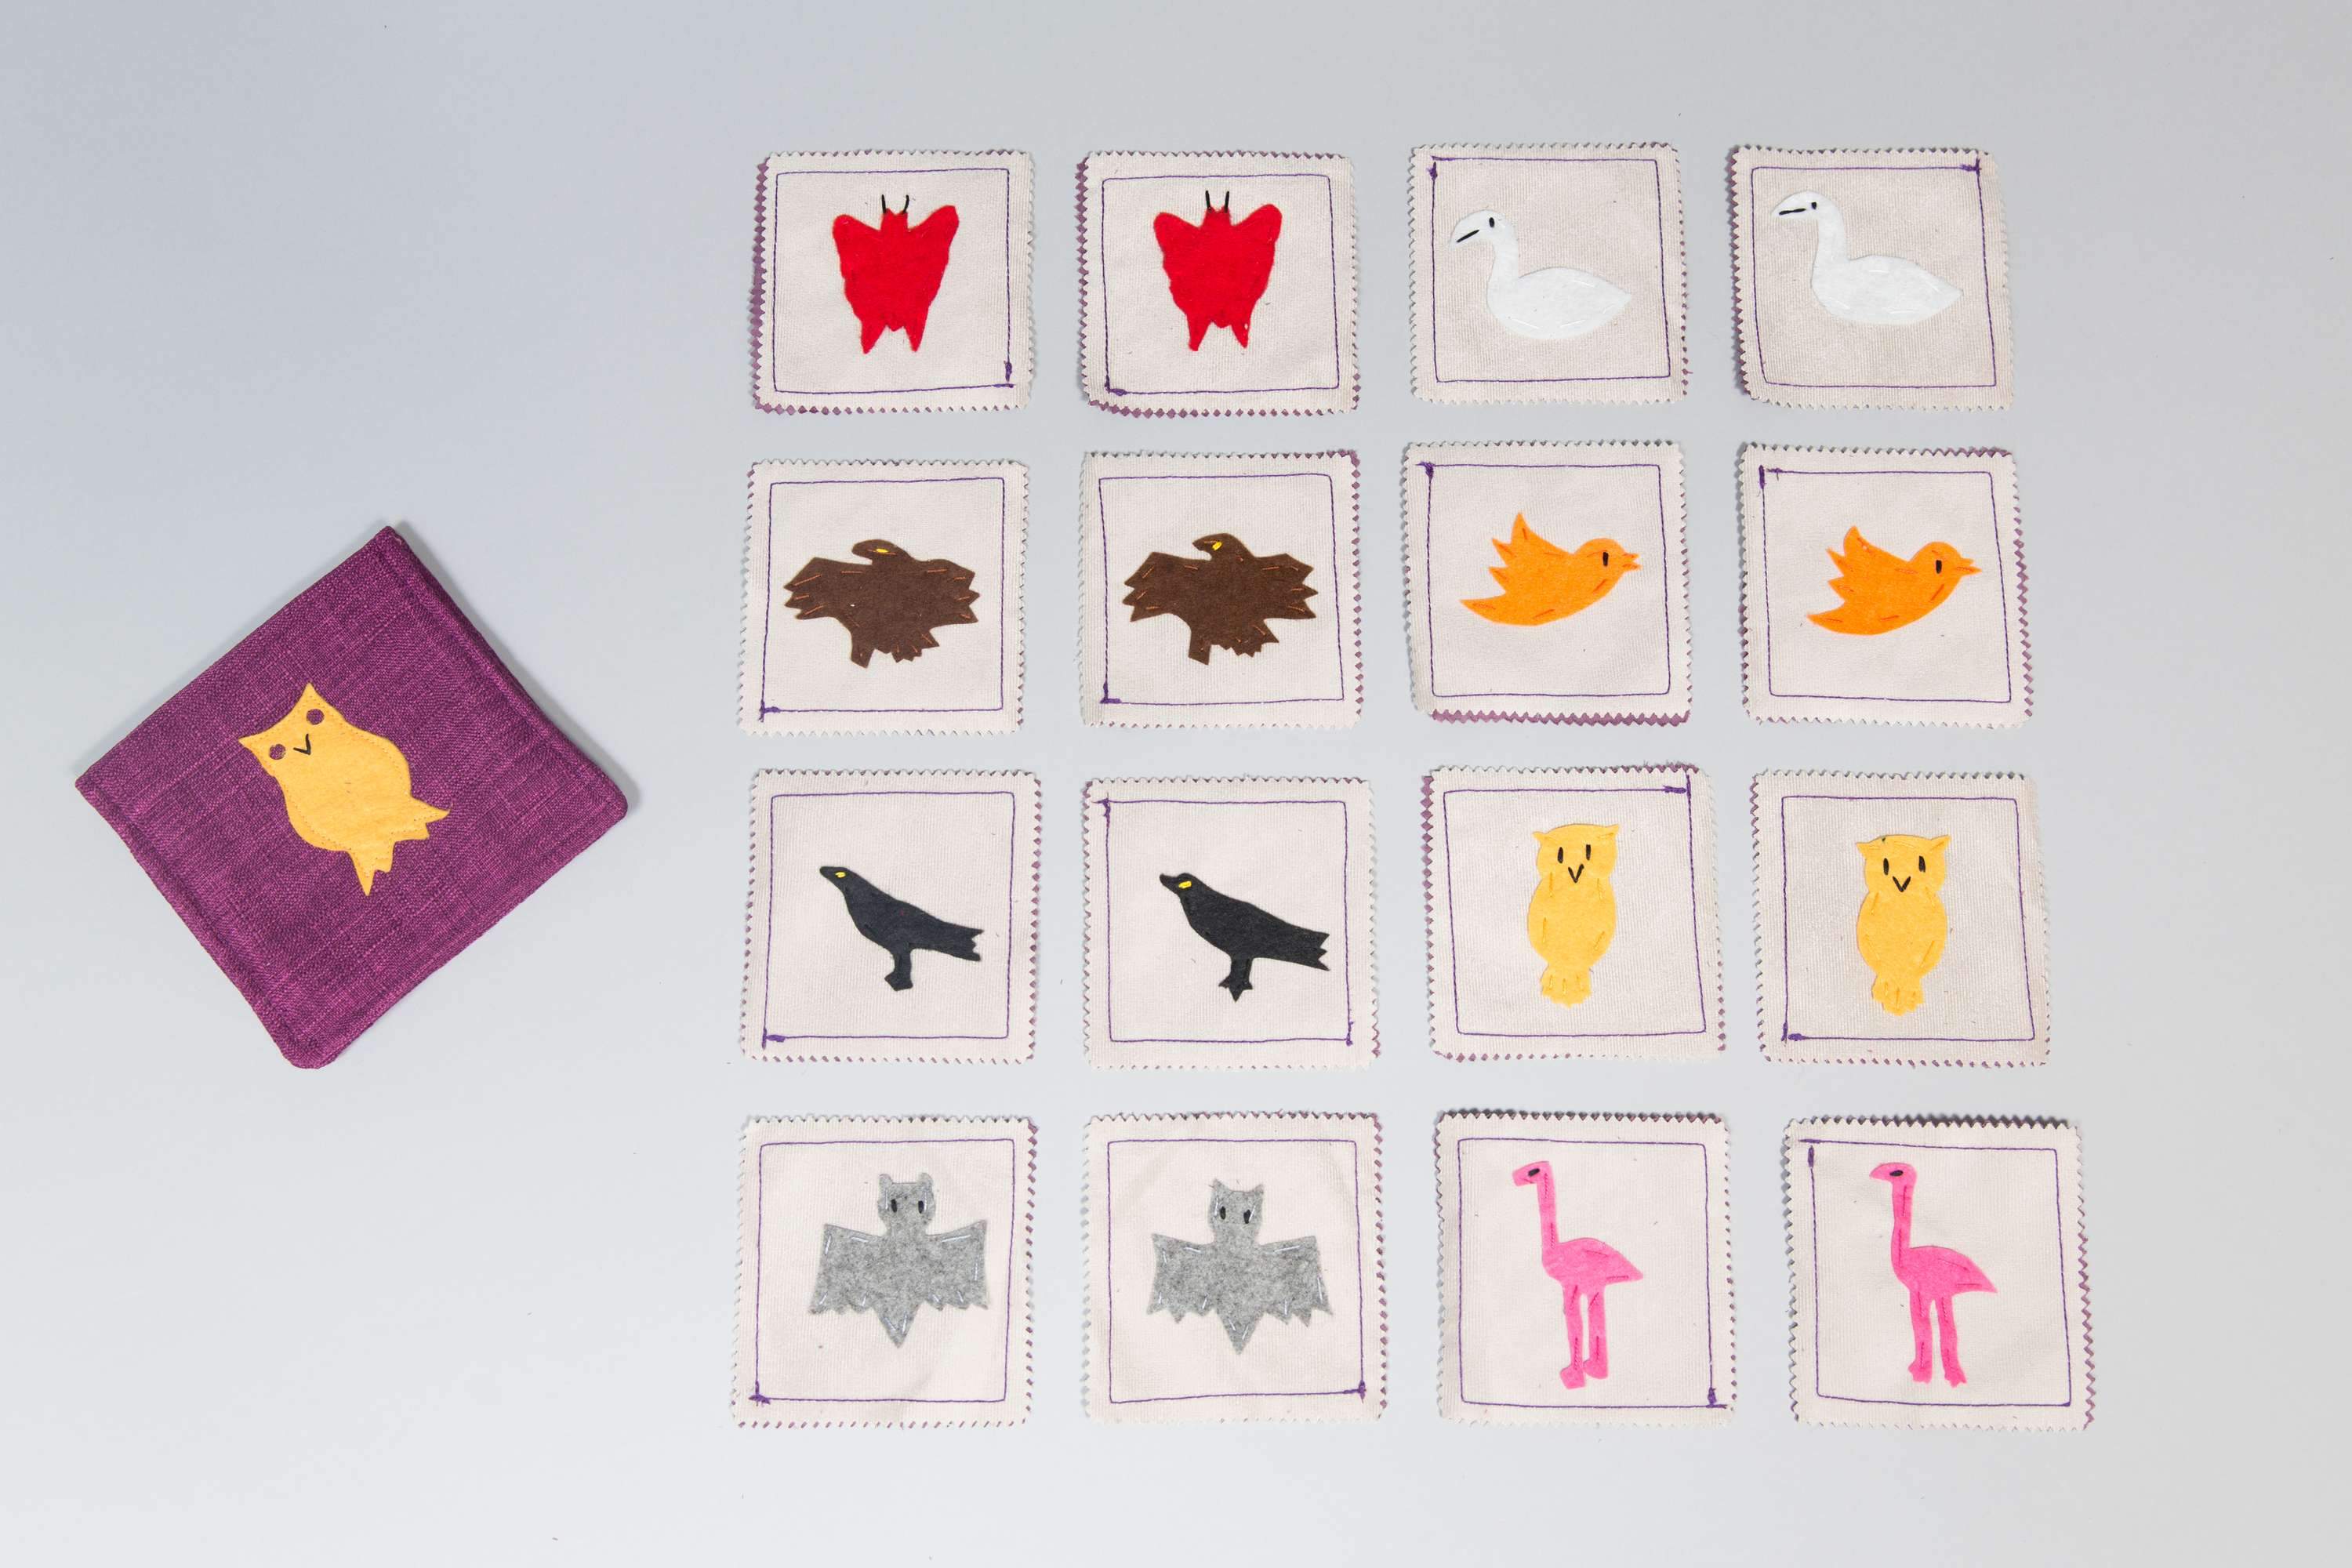 Let your child’s memory development soar with the Air Animals Memory Game. This set is composed of 8 air animal pairs for a total of 16 pieces. Your child will learn about real world concepts and improve memory, while having fun!